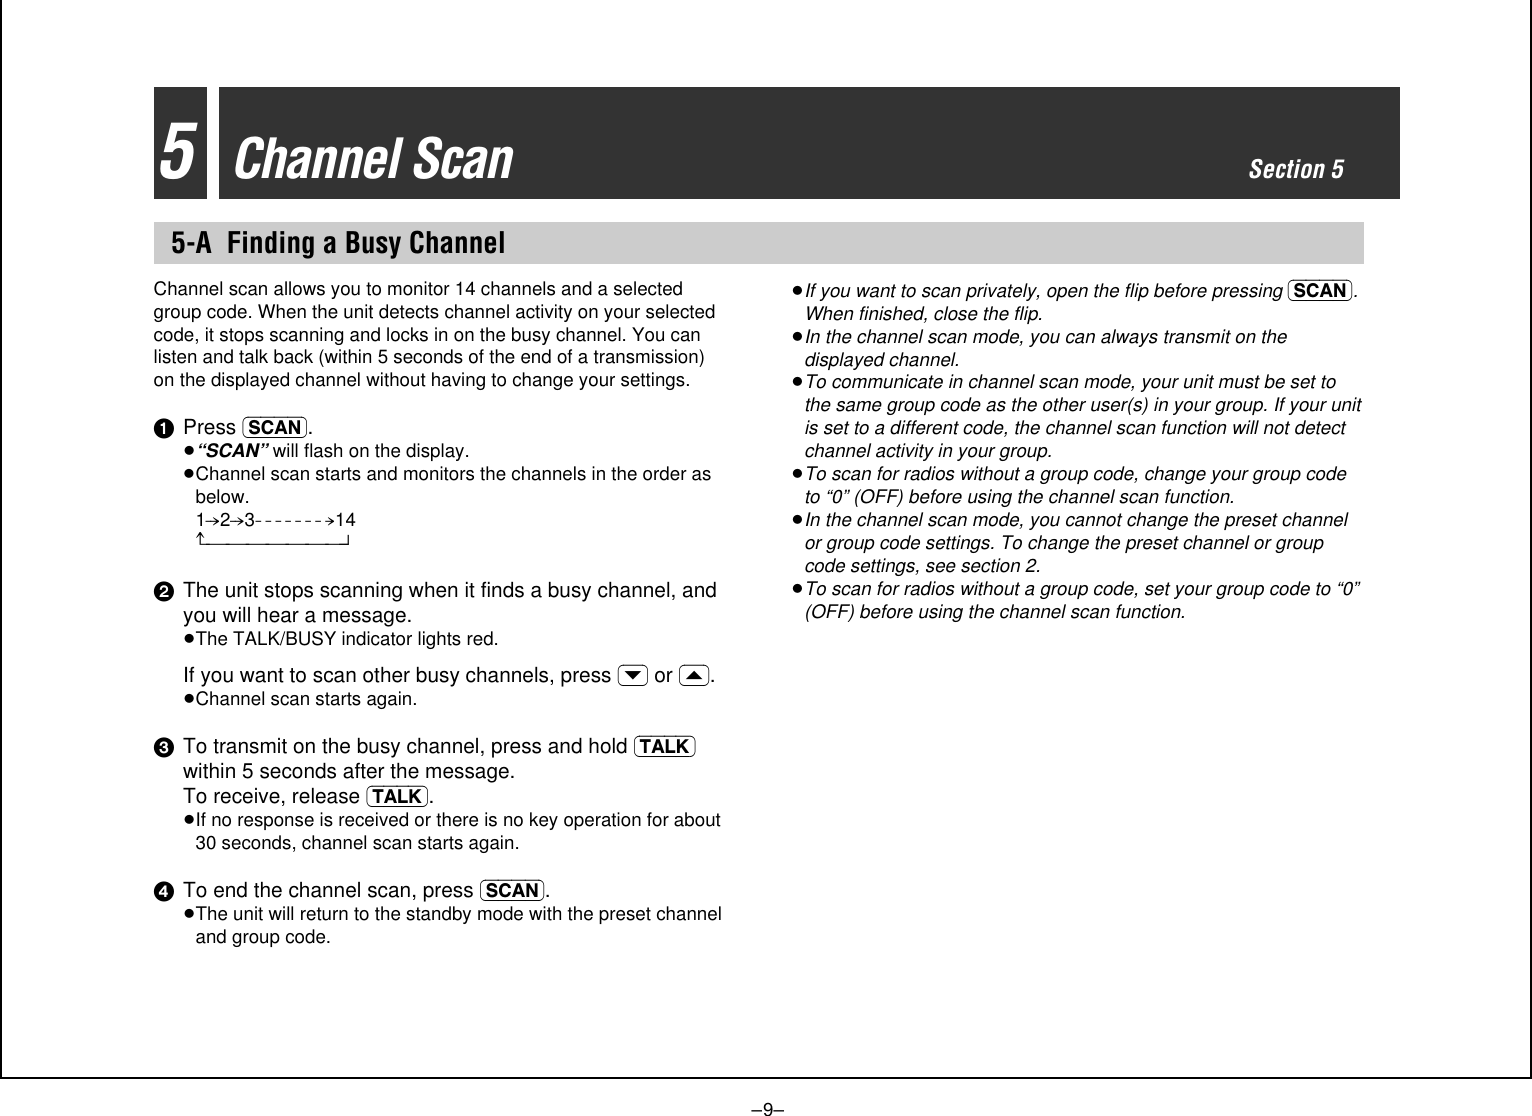 –9–5Channel ScanSection 55-A Finding a Busy ChannelChannel scan allows you to monitor 14 channels and a selectedgroup code. When the unit detects channel activity on your selectedcode, it stops scanning and locks in on the busy channel. You canlisten and talk back (within 5 seconds of the end of a transmission)on the displayed channel without having to change your settings.1Press (SCAN).≥“SCAN” will flash on the display.≥Channel scan starts and monitors the channels in the order asbelow. 1-.2-.3- - - - - - - .14^_______n2The unit stops scanning when it finds a busy channel, andyou will hear a message.≥The TALK/BUSY indicator lights red.If you want to scan other busy channels, press (›) or (‹).≥Channel scan starts again.3To transmit on the busy channel, press and hold (TALK)within 5 seconds after the message. To receive, release (TALK).≥If no response is received or there is no key operation for about30 seconds, channel scan starts again.4To end the channel scan, press (SCAN).≥The unit will return to the standby mode with the preset channeland group code.≥If you want to scan privately, open the flip before pressing (SCAN).When finished, close the flip.≥In the channel scan mode, you can always transmit on thedisplayed channel.≥To communicate in channel scan mode, your unit must be set tothe same group code as the other user(s) in your group. If your unitis set to a different code, the channel scan function will not detectchannel activity in your group.≥To scan for radios without a group code, change your group codeto “0” (OFF) before using the channel scan function.≥In the channel scan mode, you cannot change the preset channelor group code settings. To change the preset channel or groupcode settings, see section 2.≥To scan for radios without a group code, set your group code to “0”(OFF) before using the channel scan function.